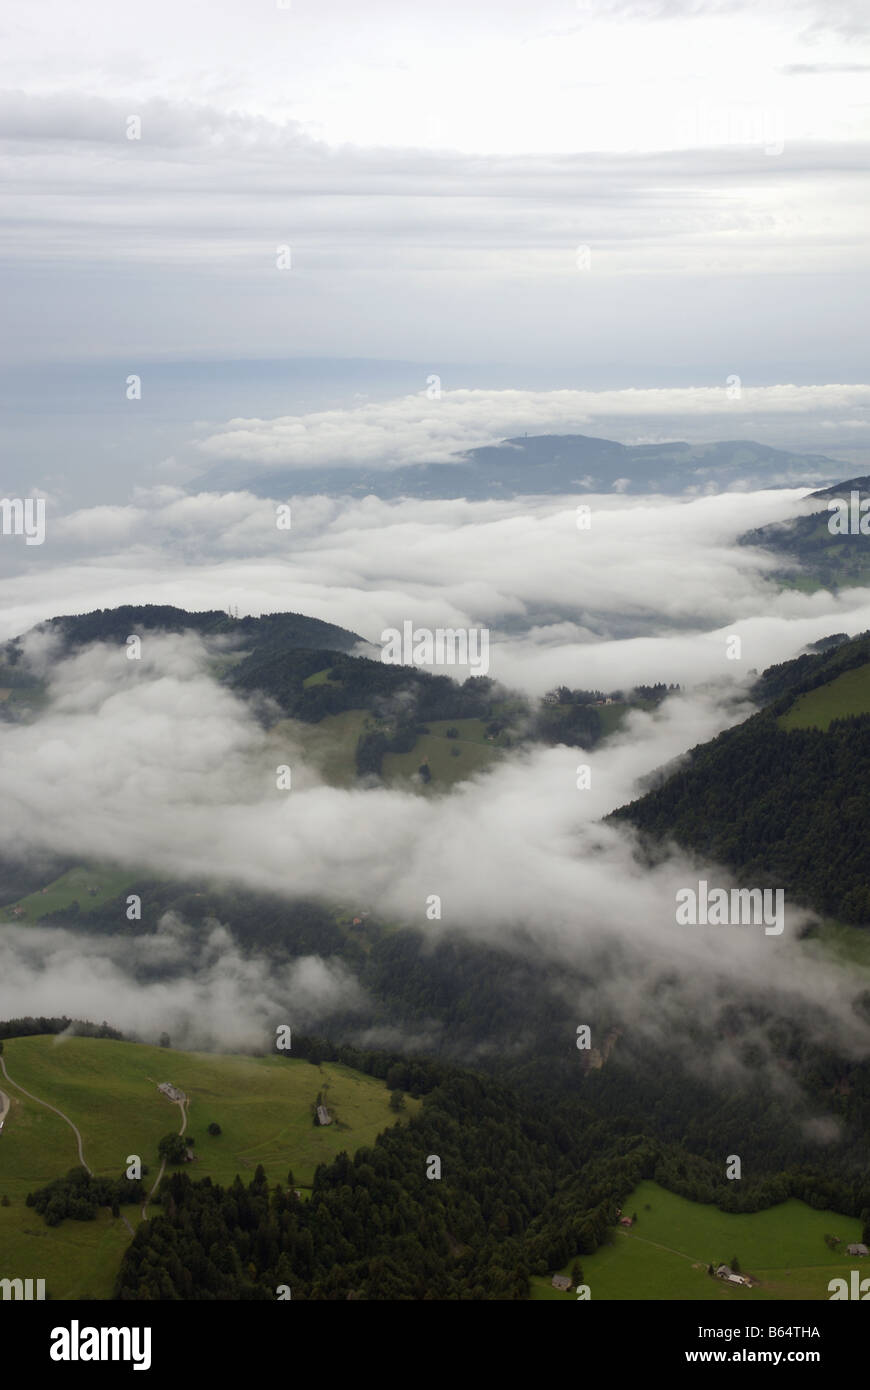 Switzerland s Bernese Alps with low cloud Photographed from the peak of La Dent de Jaman looking out over Lake Geneva Stock Photo